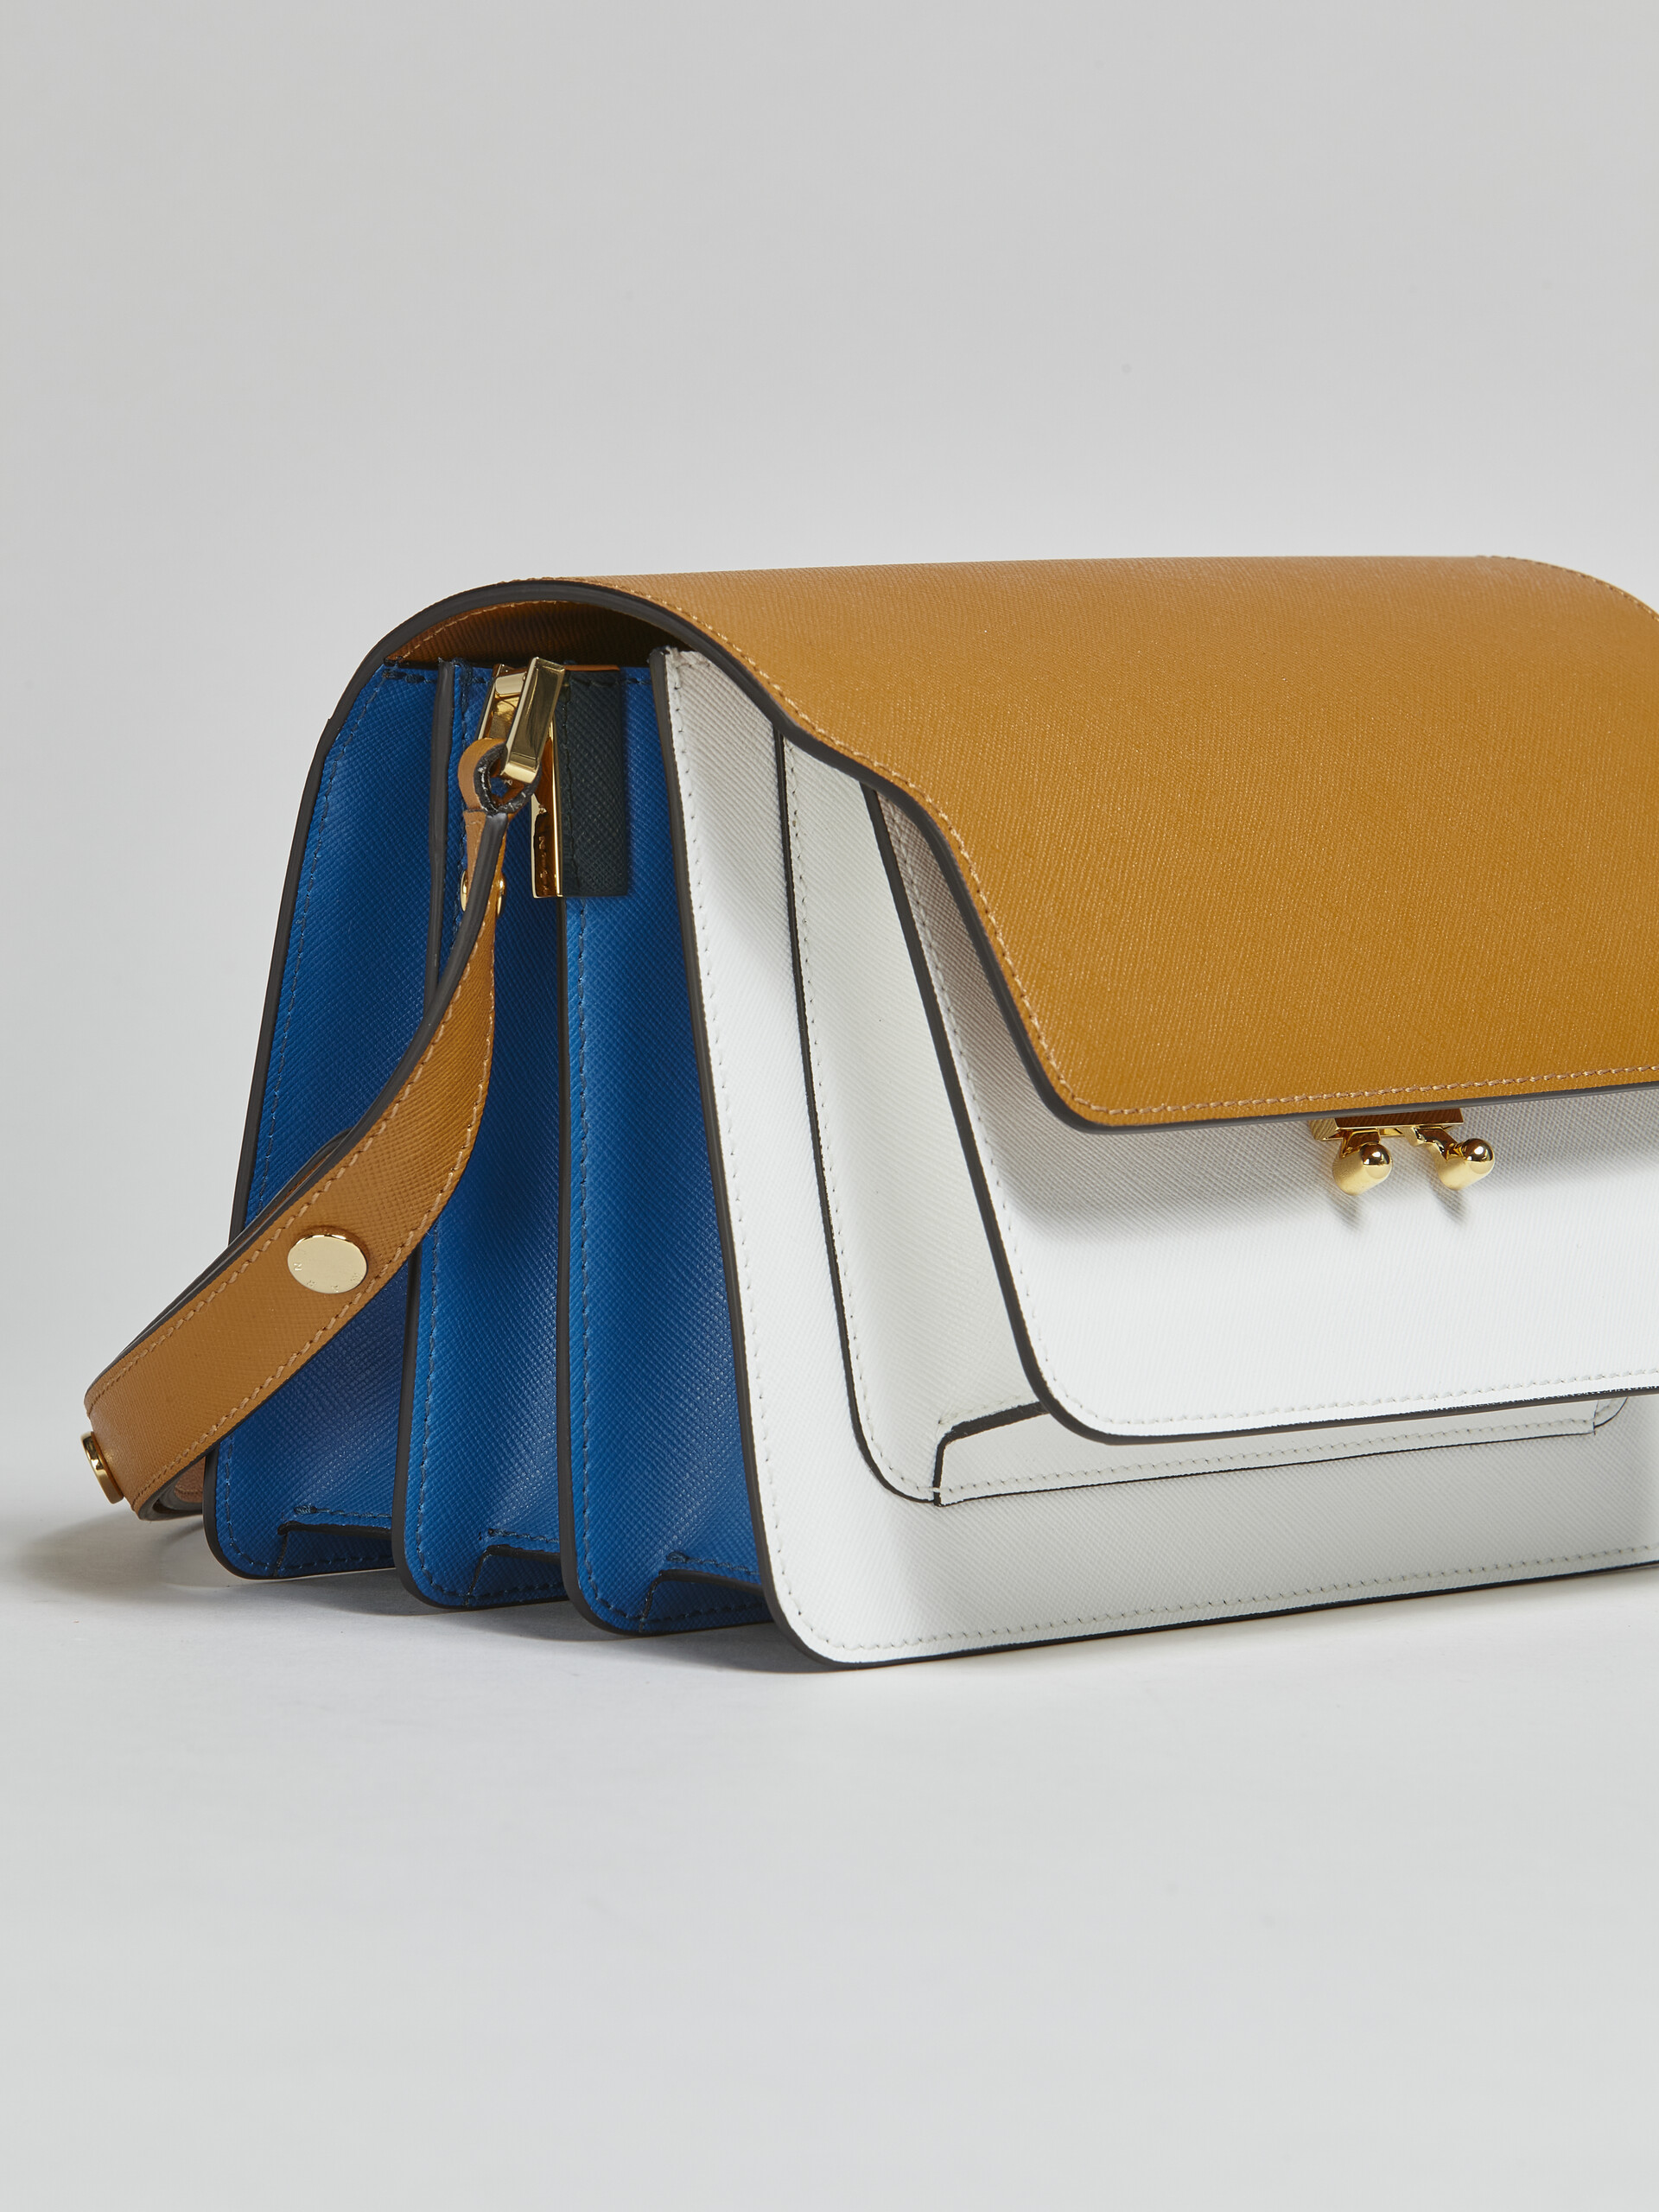 TRUNK medium bag in brown white and blue saffiano leather - Shoulder Bags - Image 4